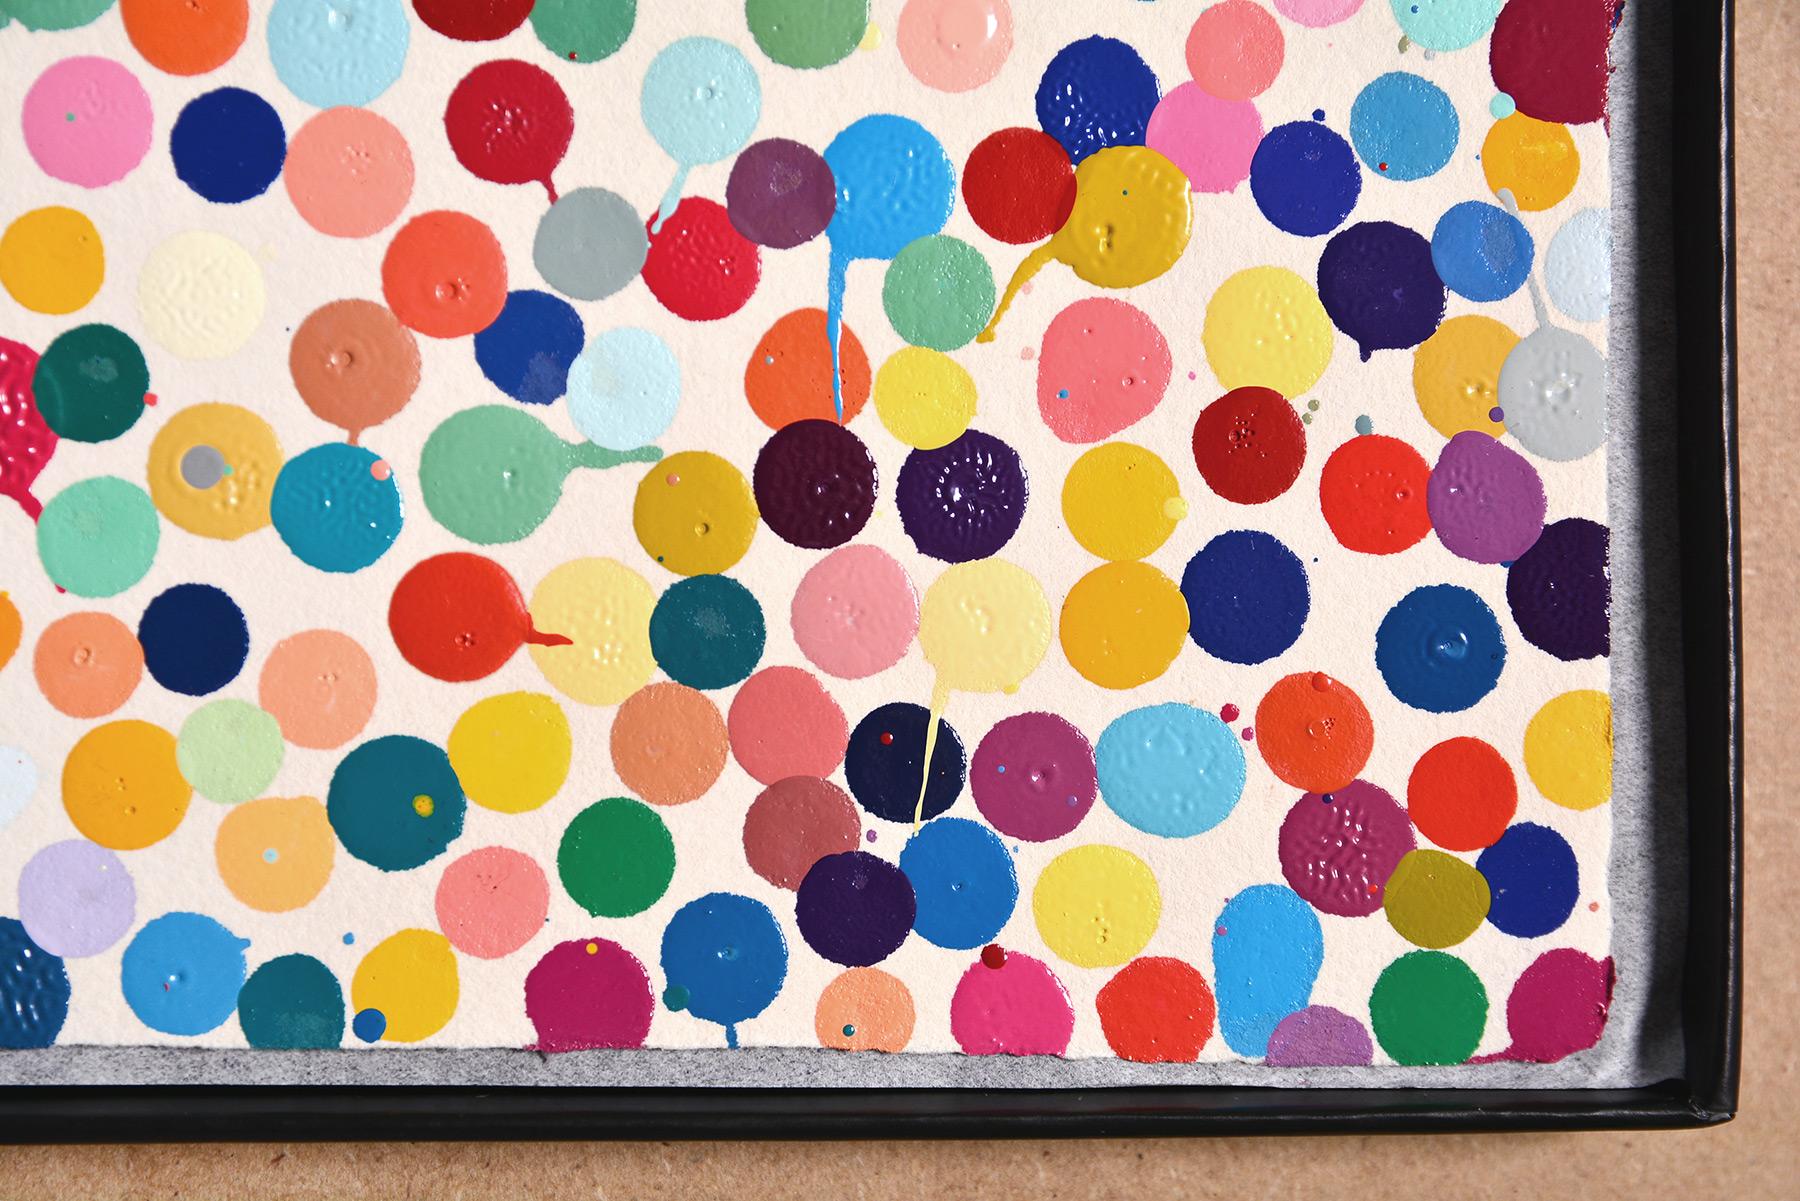 DAMIEN HIRST - THE CURRENCY. Original work The Currency Project. Dots. Colors 4